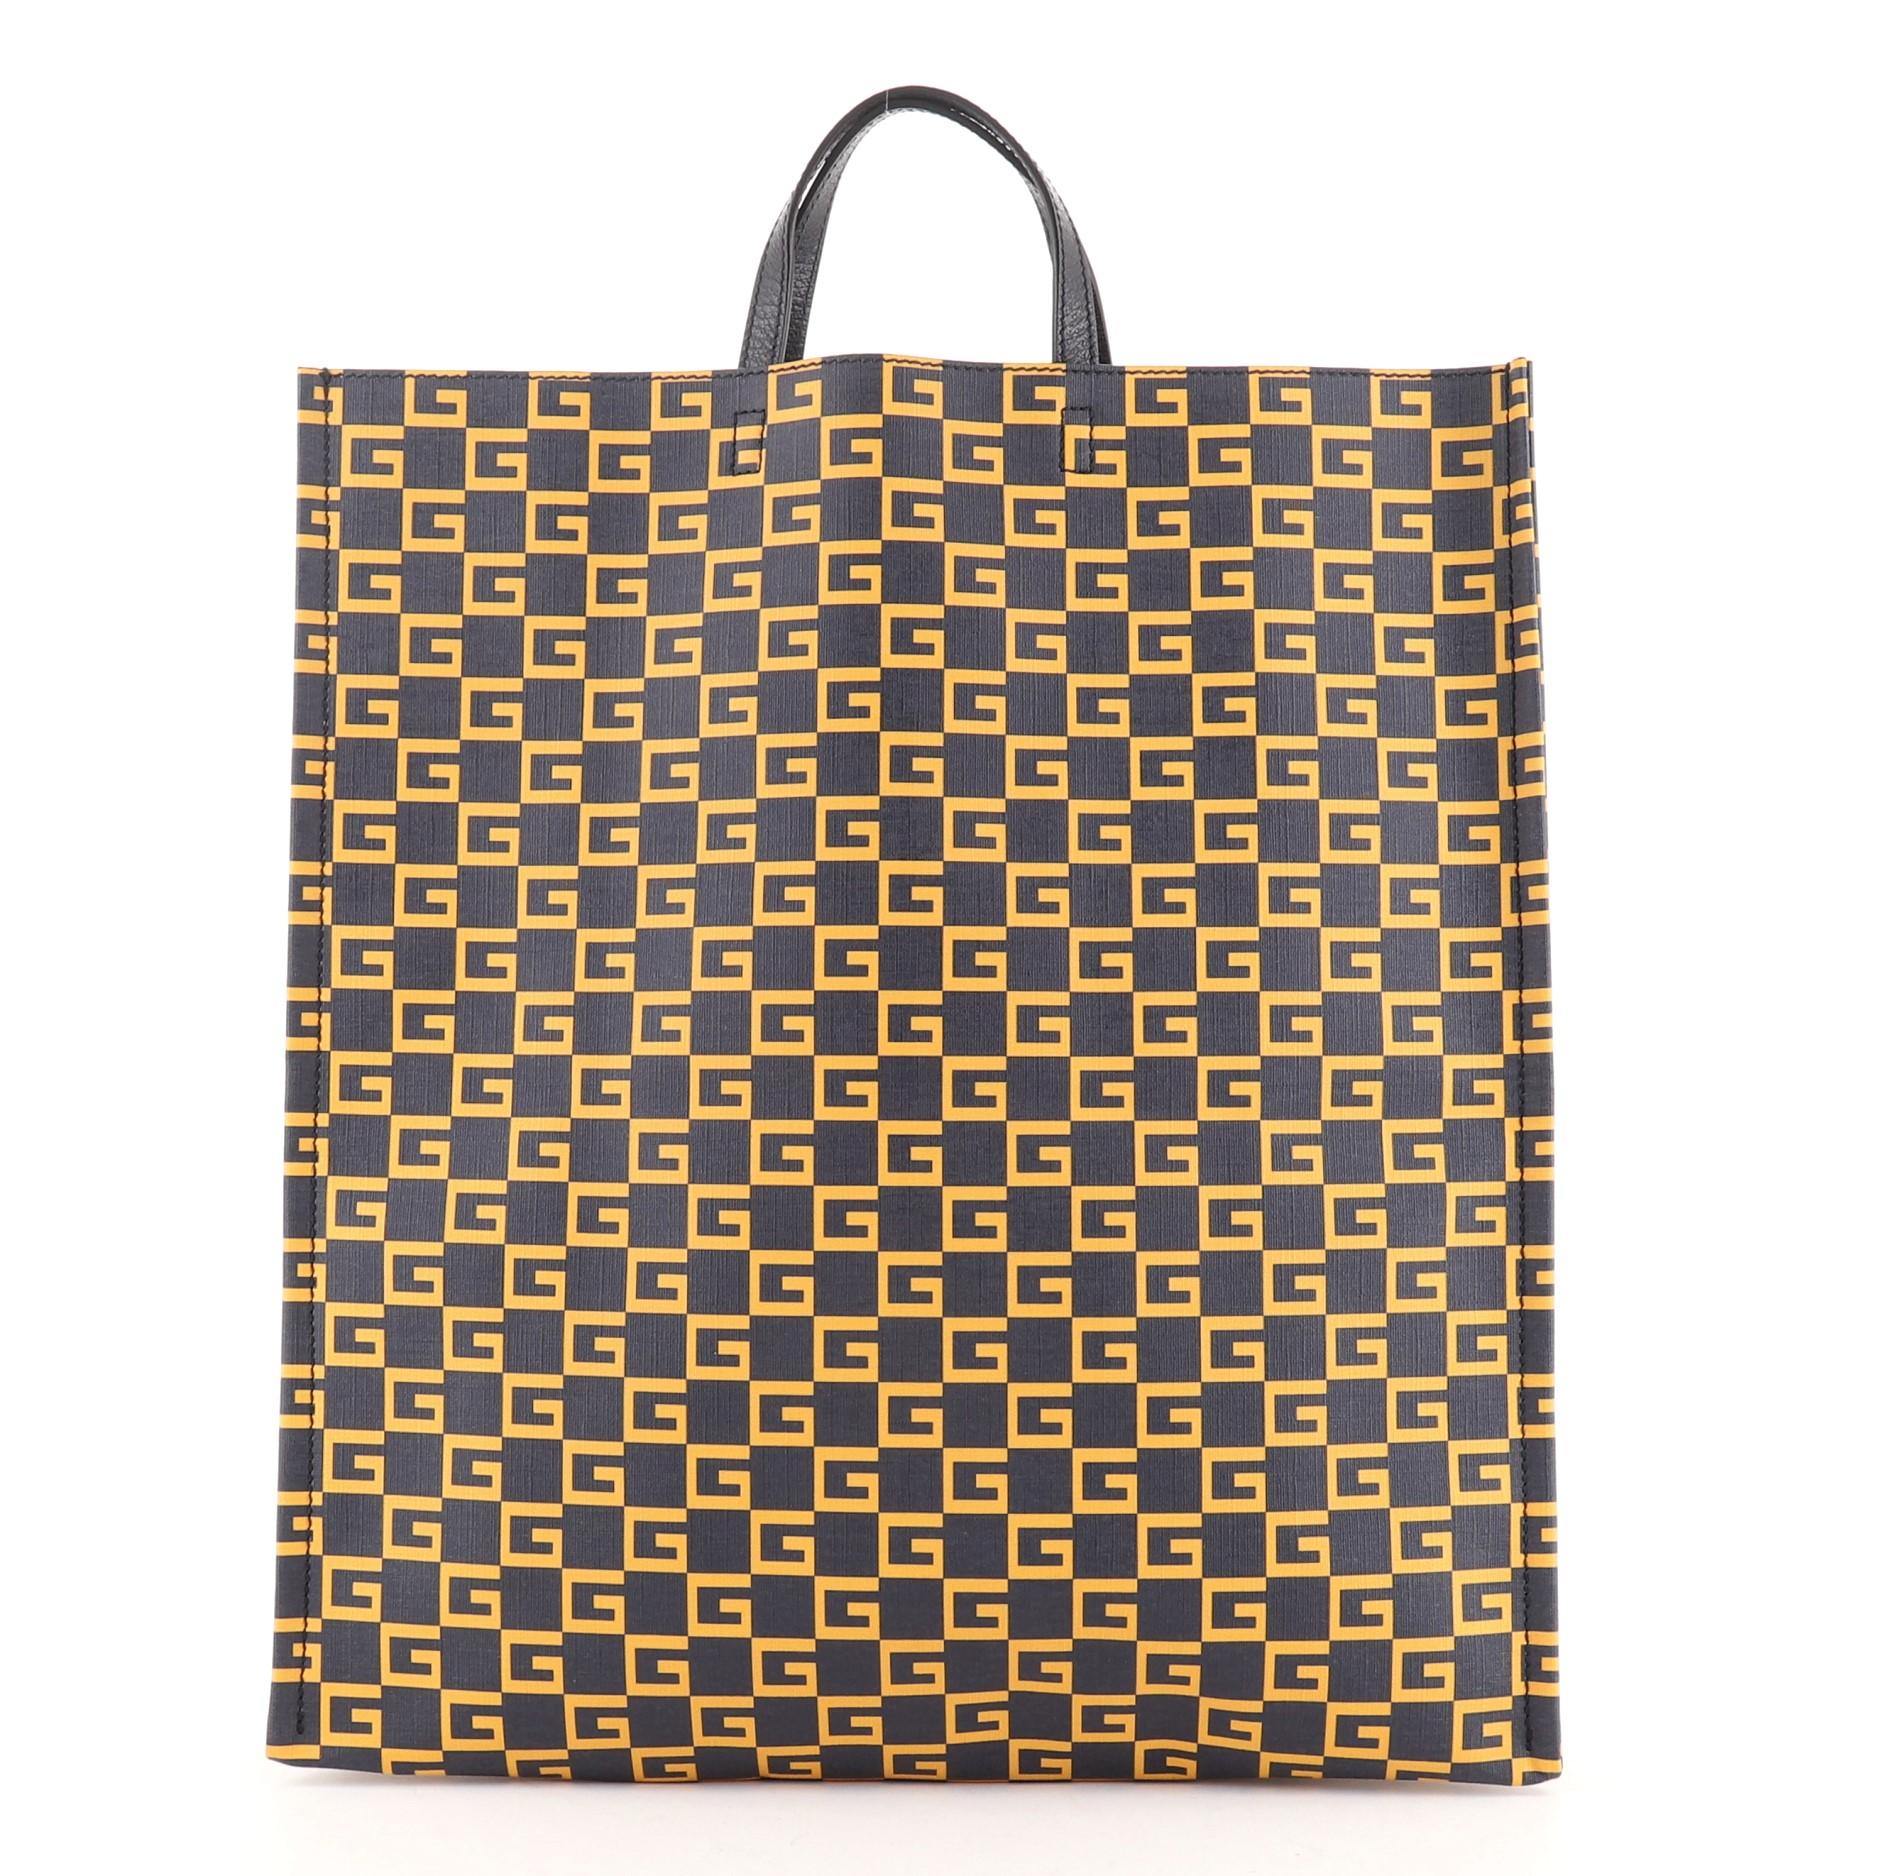 Gucci Square G Open Tote Printed Coated Canvas Large
Blue, Print, Yellow

Condition Details: Light wear in interior.

50790MSC

Height 18